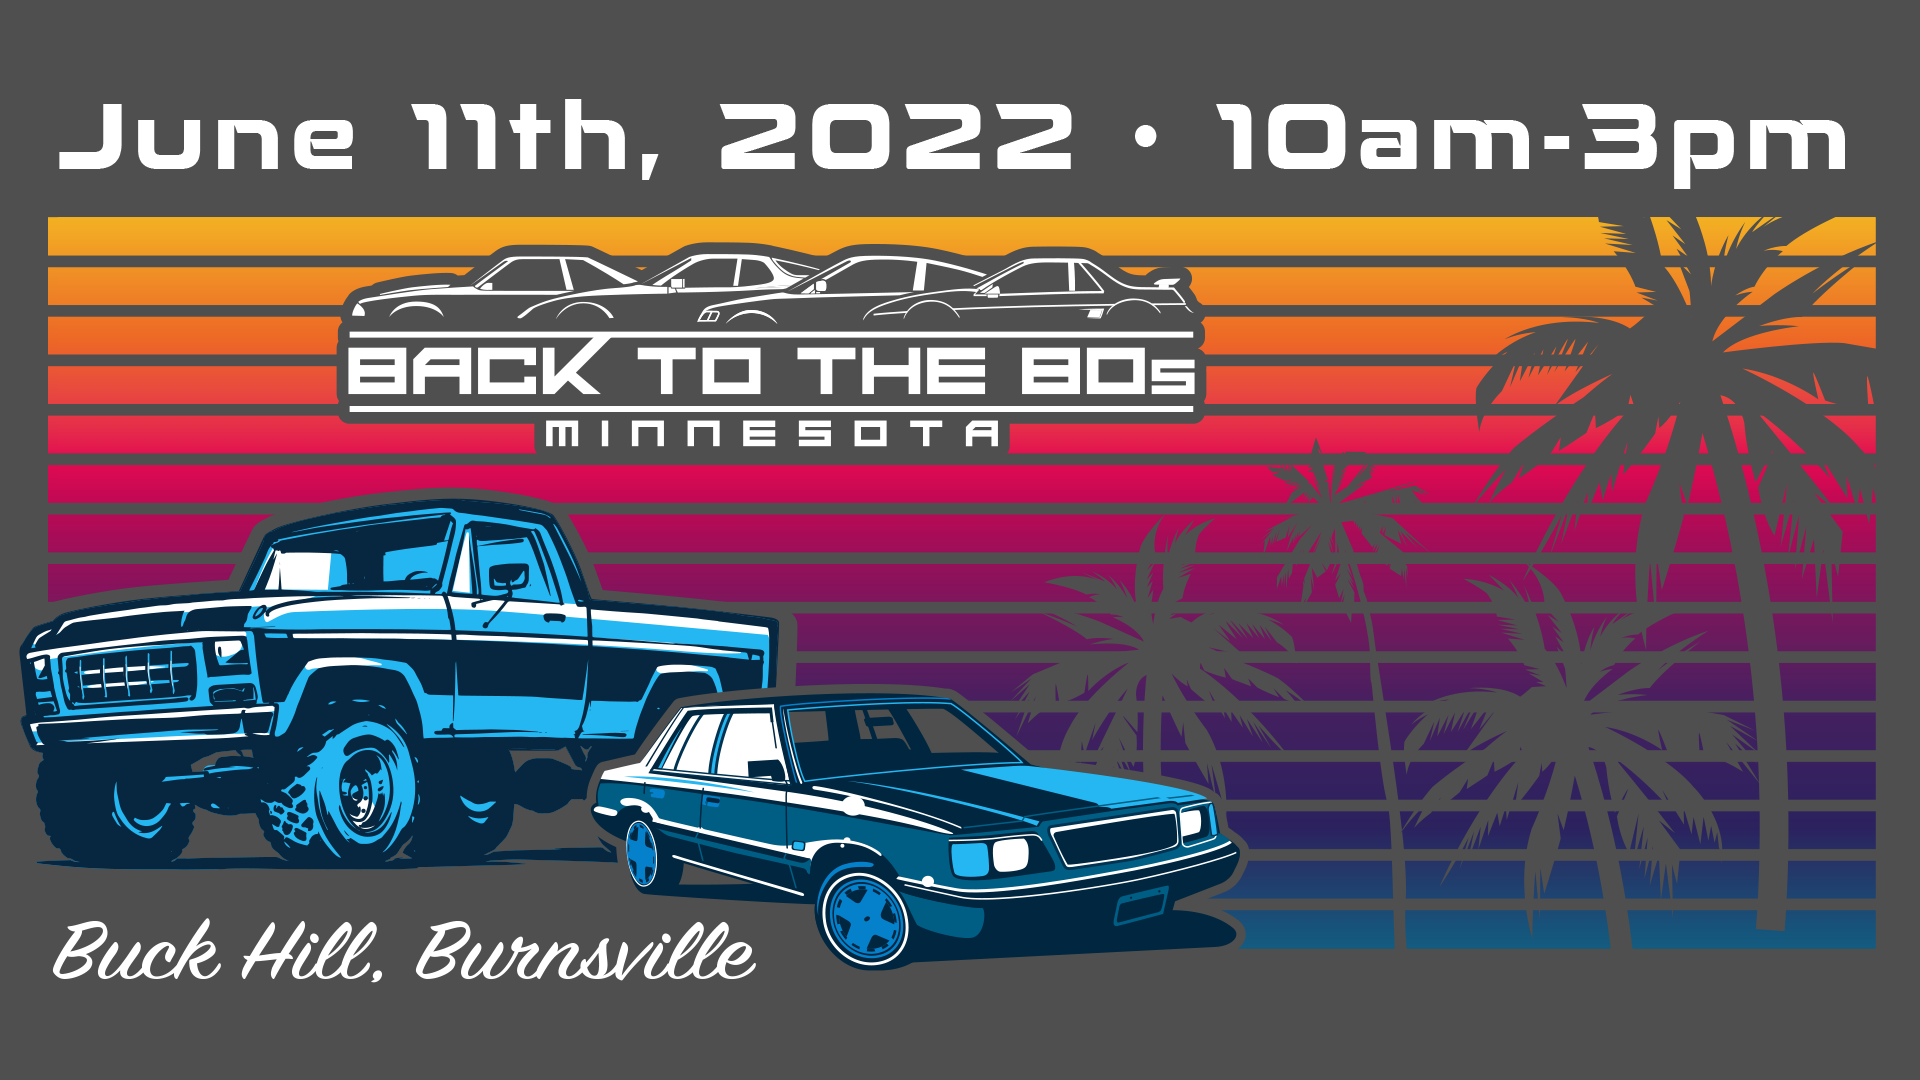 Back To The 80s 2022